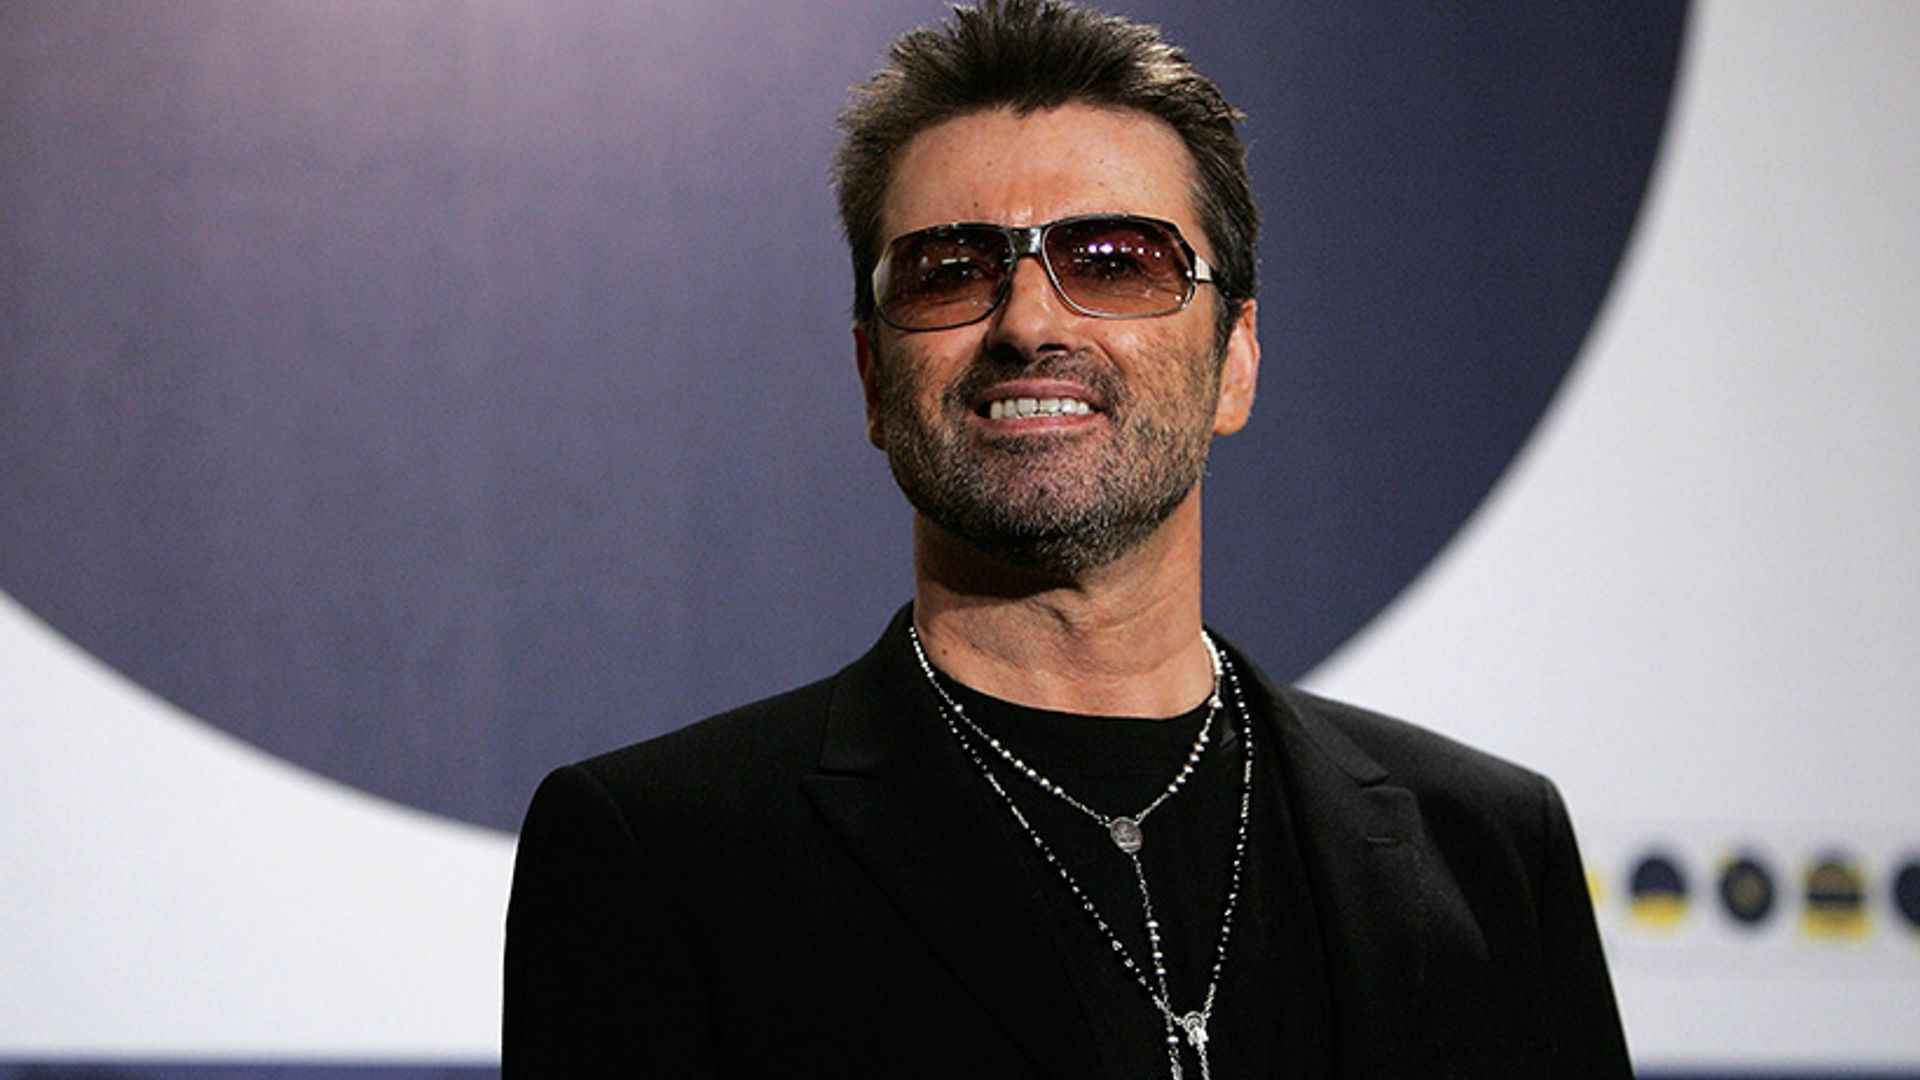 George Michael revealed to be mystery man responsible for birth of This Morning's 'miracle' IVF baby